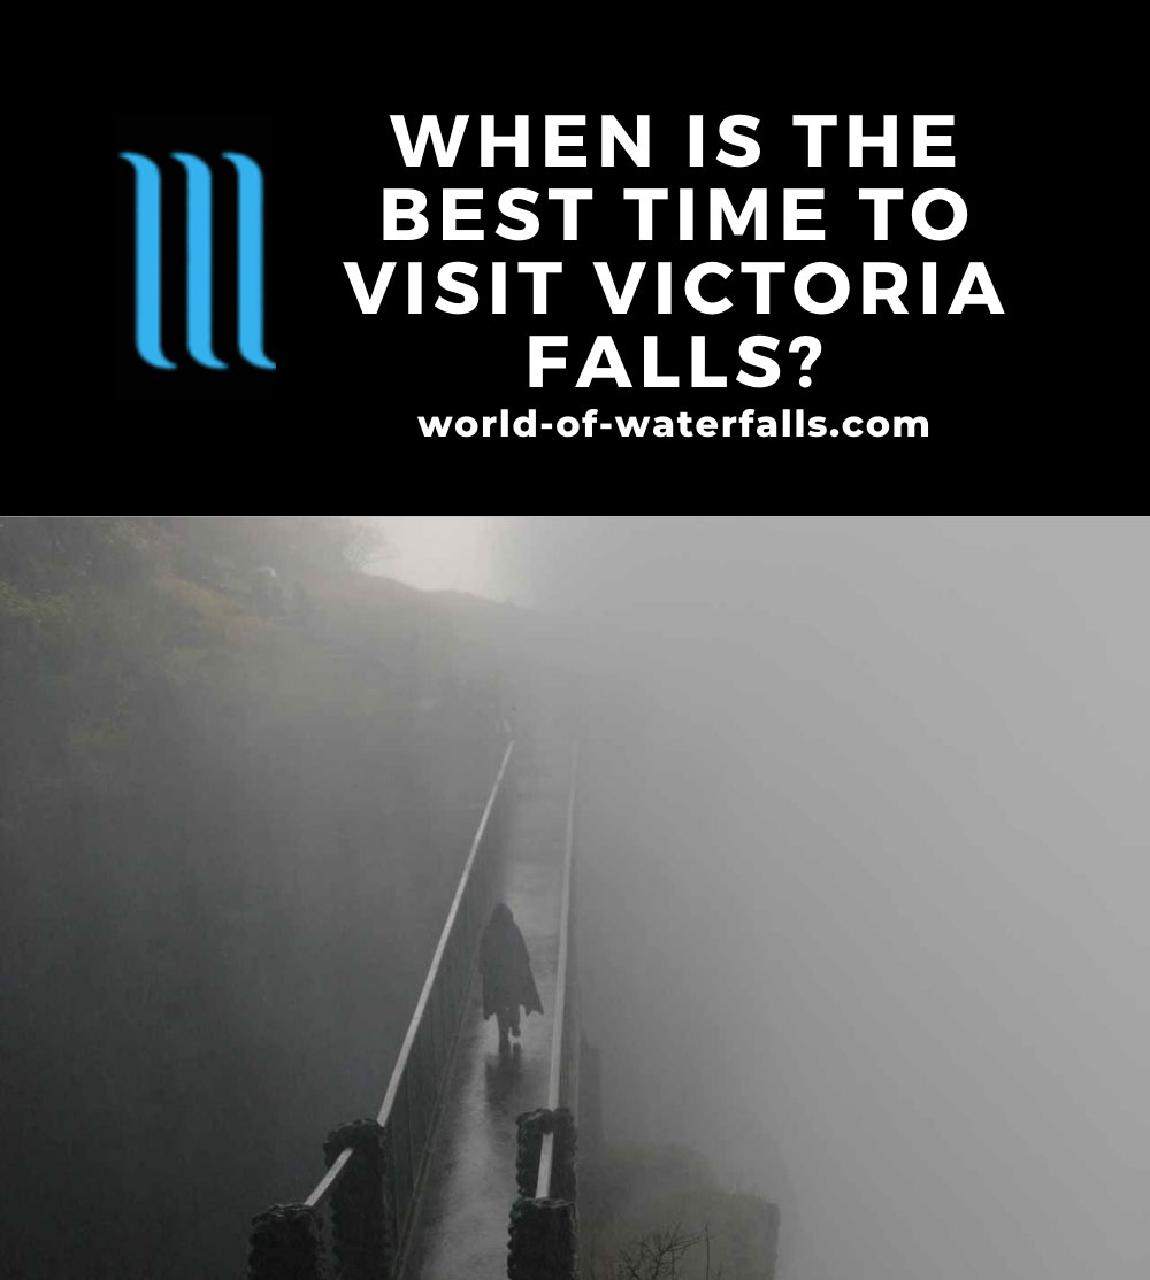 When is the Best Time to visit Victoria Falls?